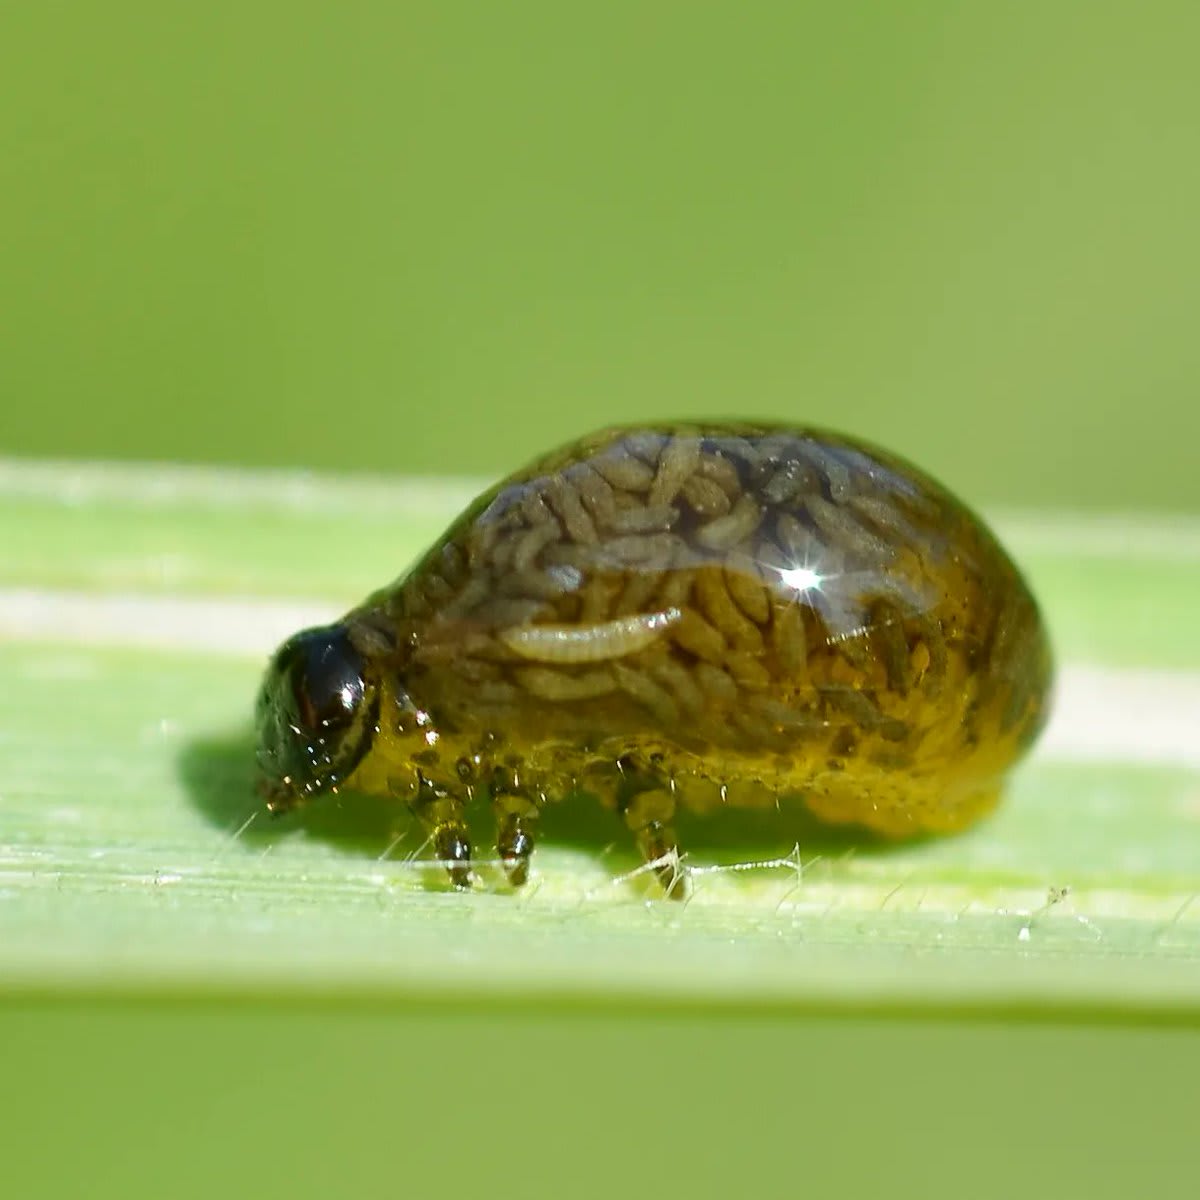 This revolting weirdo carries its own poop on its back Poop backpacks are not uncommon for leaf beetle larvae (Cassidinae). Some are still gooey, while others encase theirs like this one, for camouflage, or parasite deterrent purposes.  Gilles San Martin/Wiki/CC BY-SA 3.0